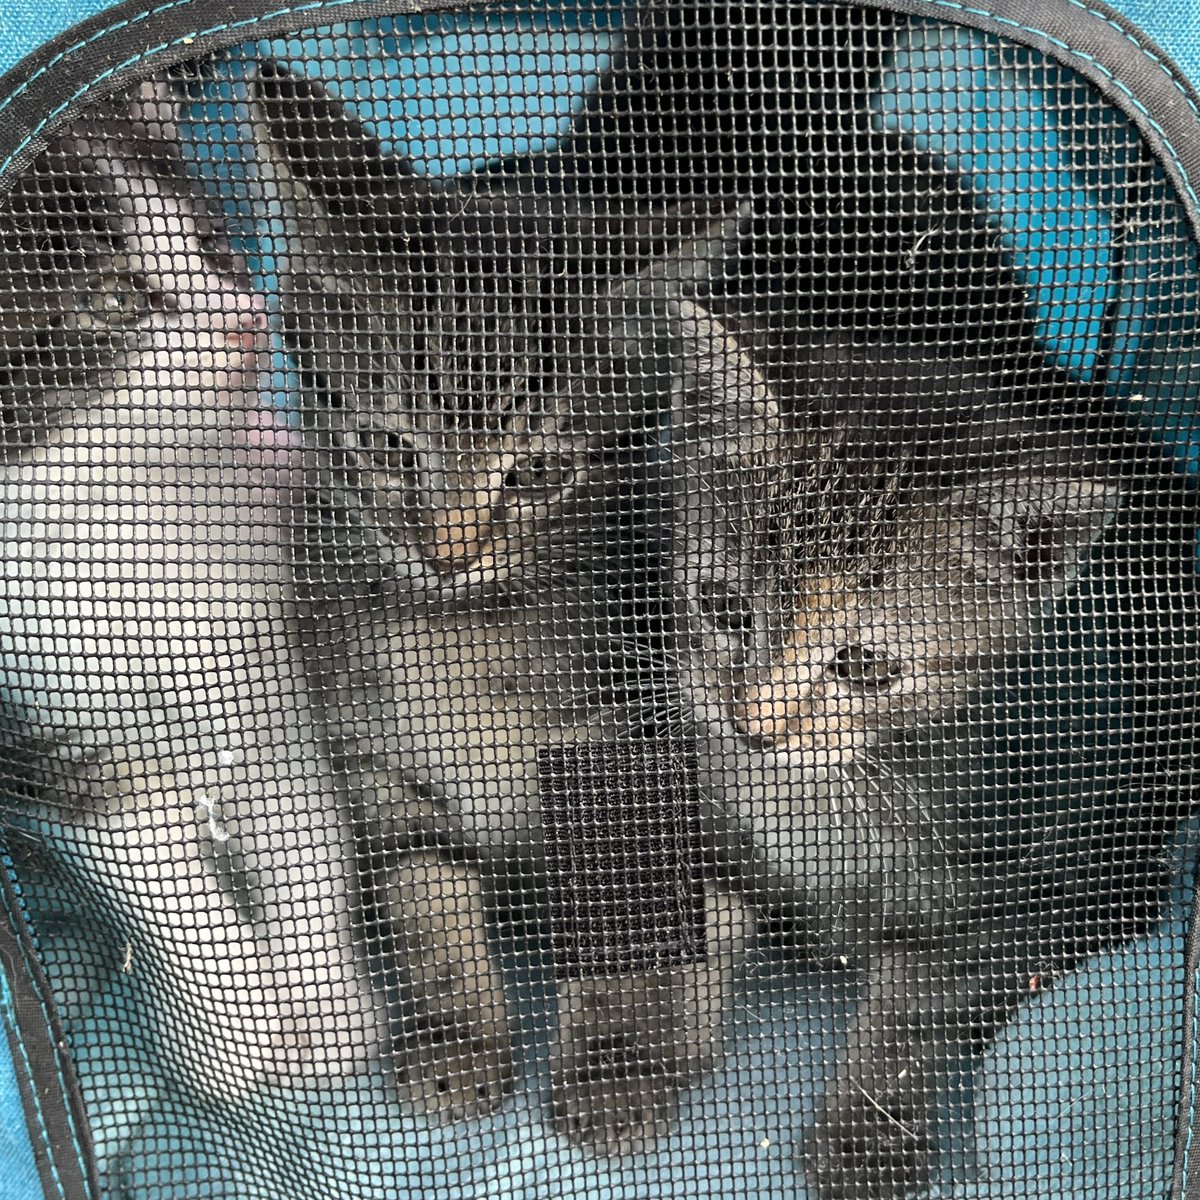 The #FosterKittens did very well on their first ride in the stroller. They were a little nervous at first, then got interested in looking around. We just went around the block one time for this first walk. #CatOfTwitter #CatsOfX